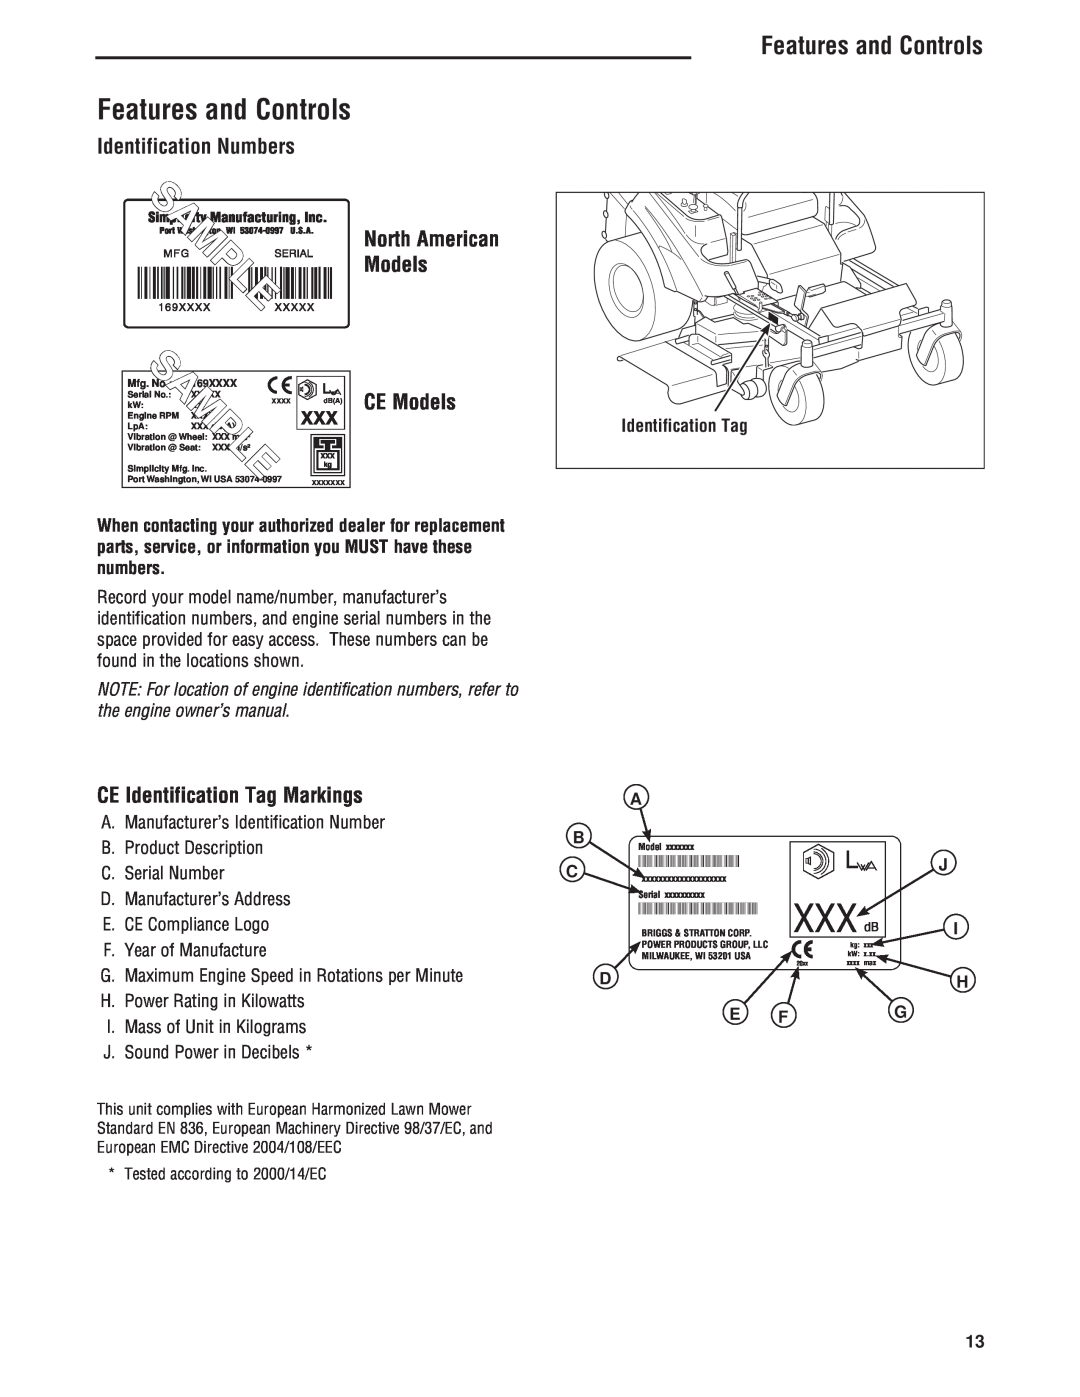 Simplicity 5101604 manual Features and Controls, Identification Numbers, CE Models, CE Identification Tag Markings, Sample 